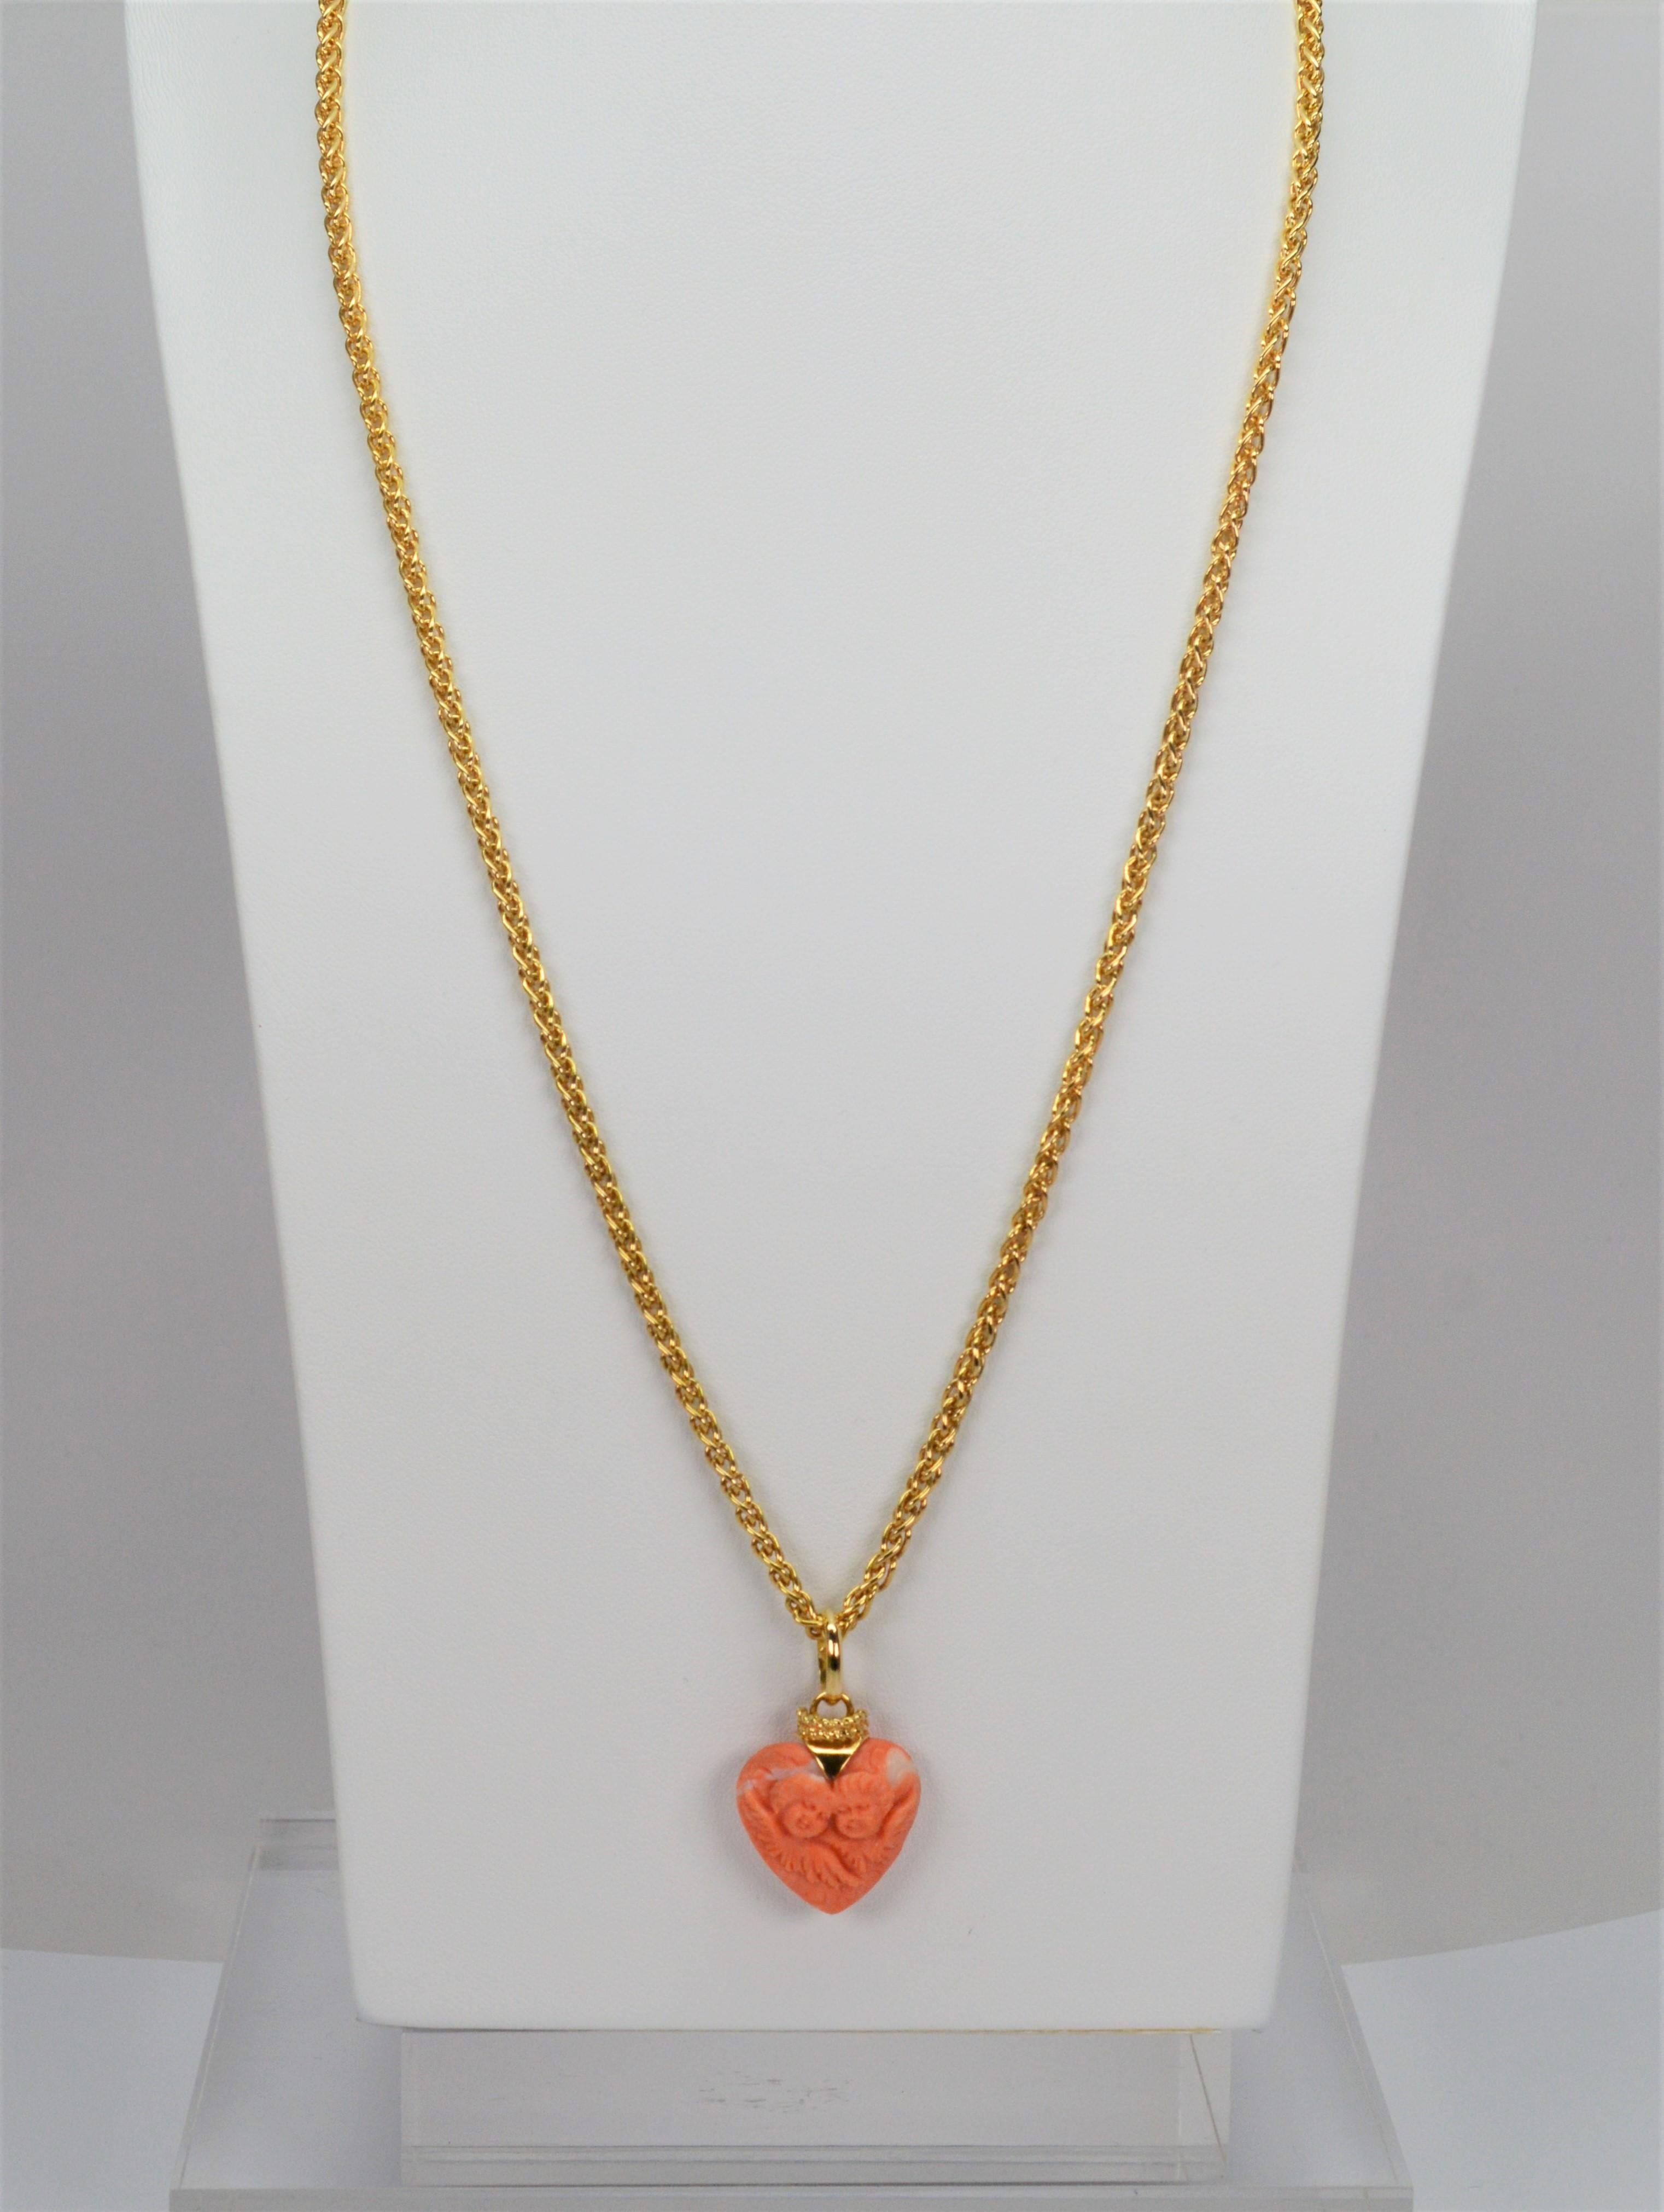 Hand Carved Cherub Coral Heart Pendant 18 Karat Italian Gold Chain Necklace In Excellent Condition For Sale In Mount Kisco, NY